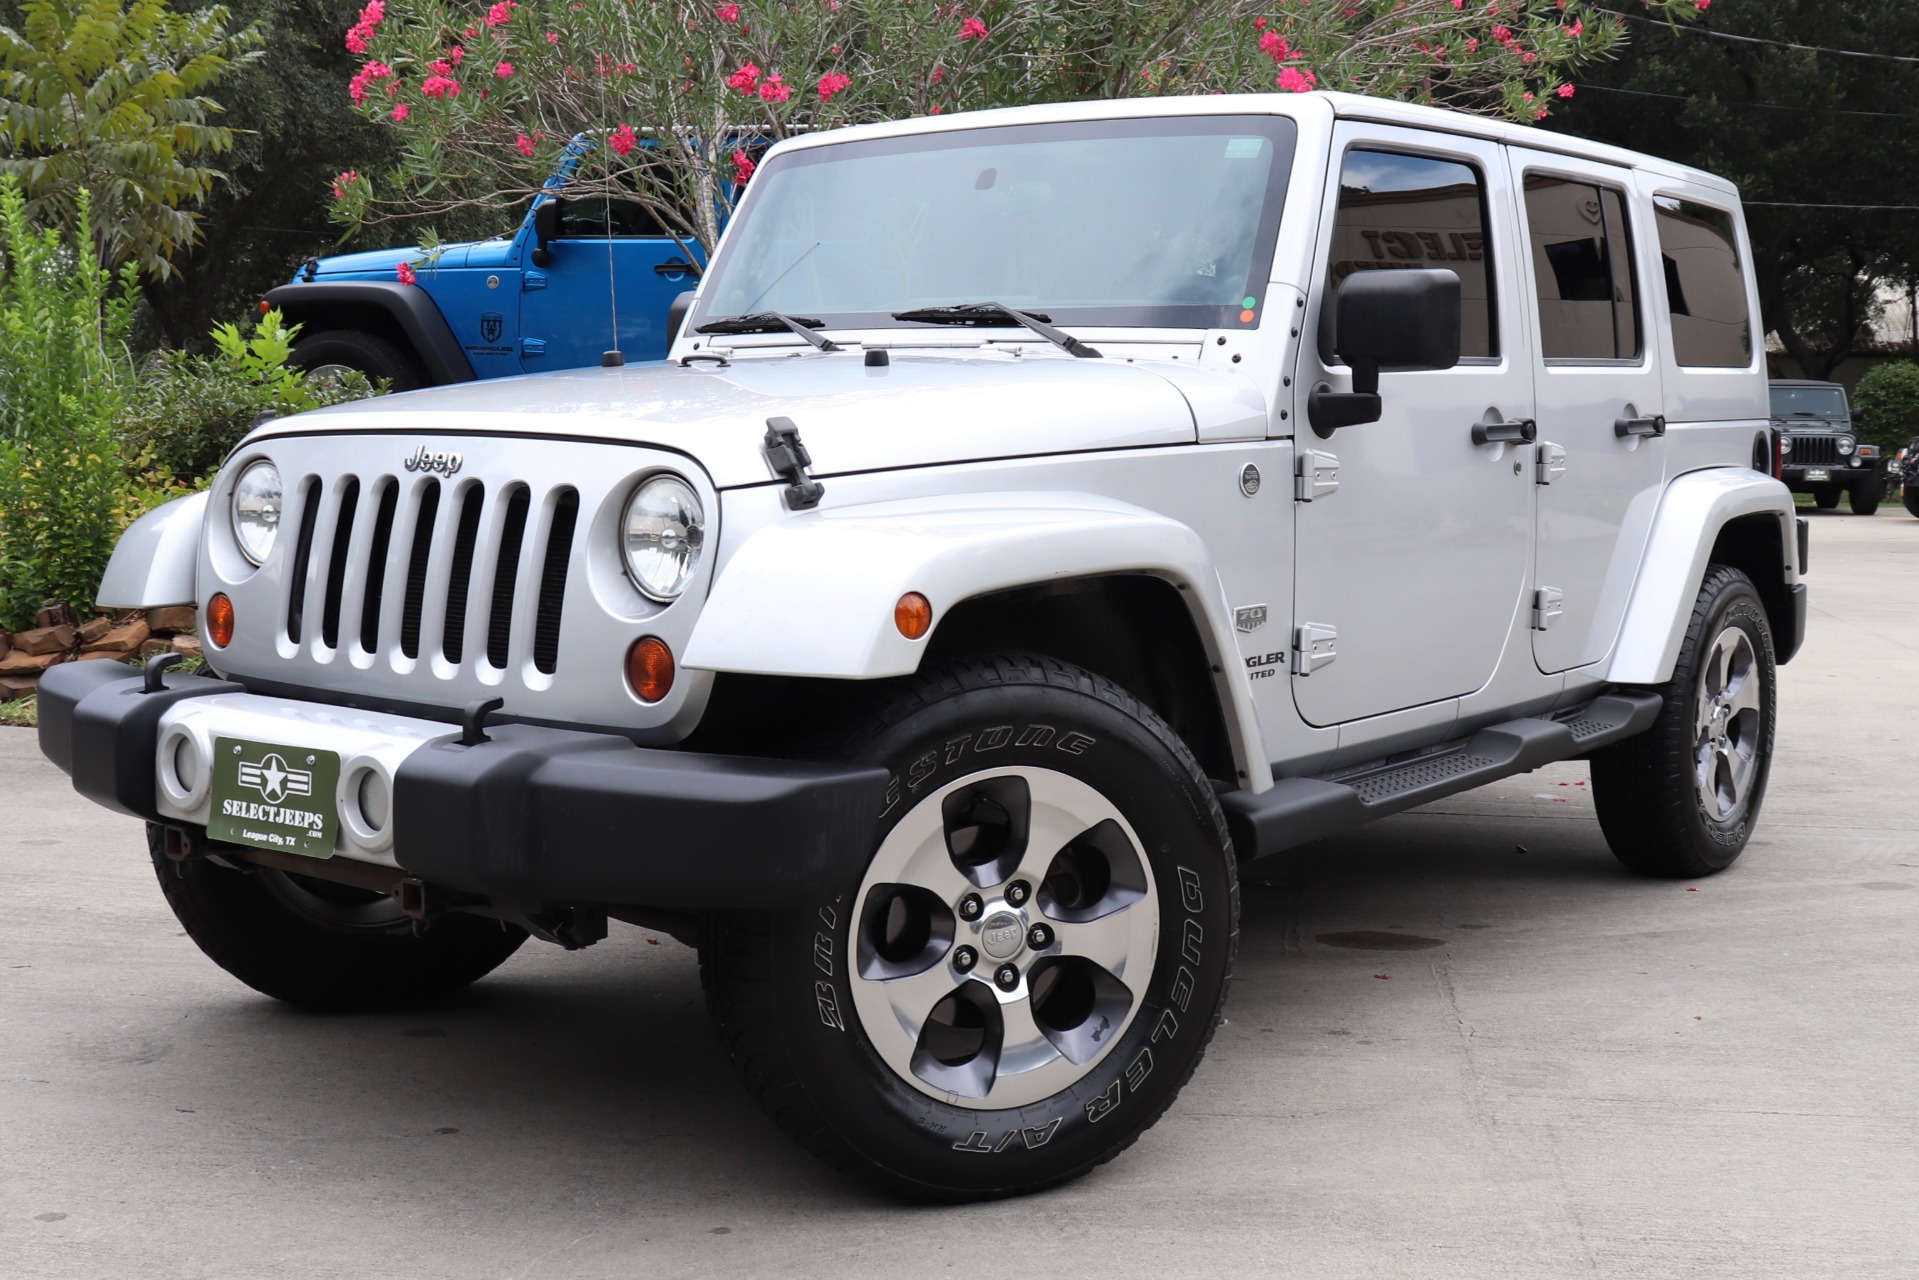 Used-2011-Jeep-Wrangler-Unlimited-4WD-4dr-70th-Anniversary-*Ltd-Avail*